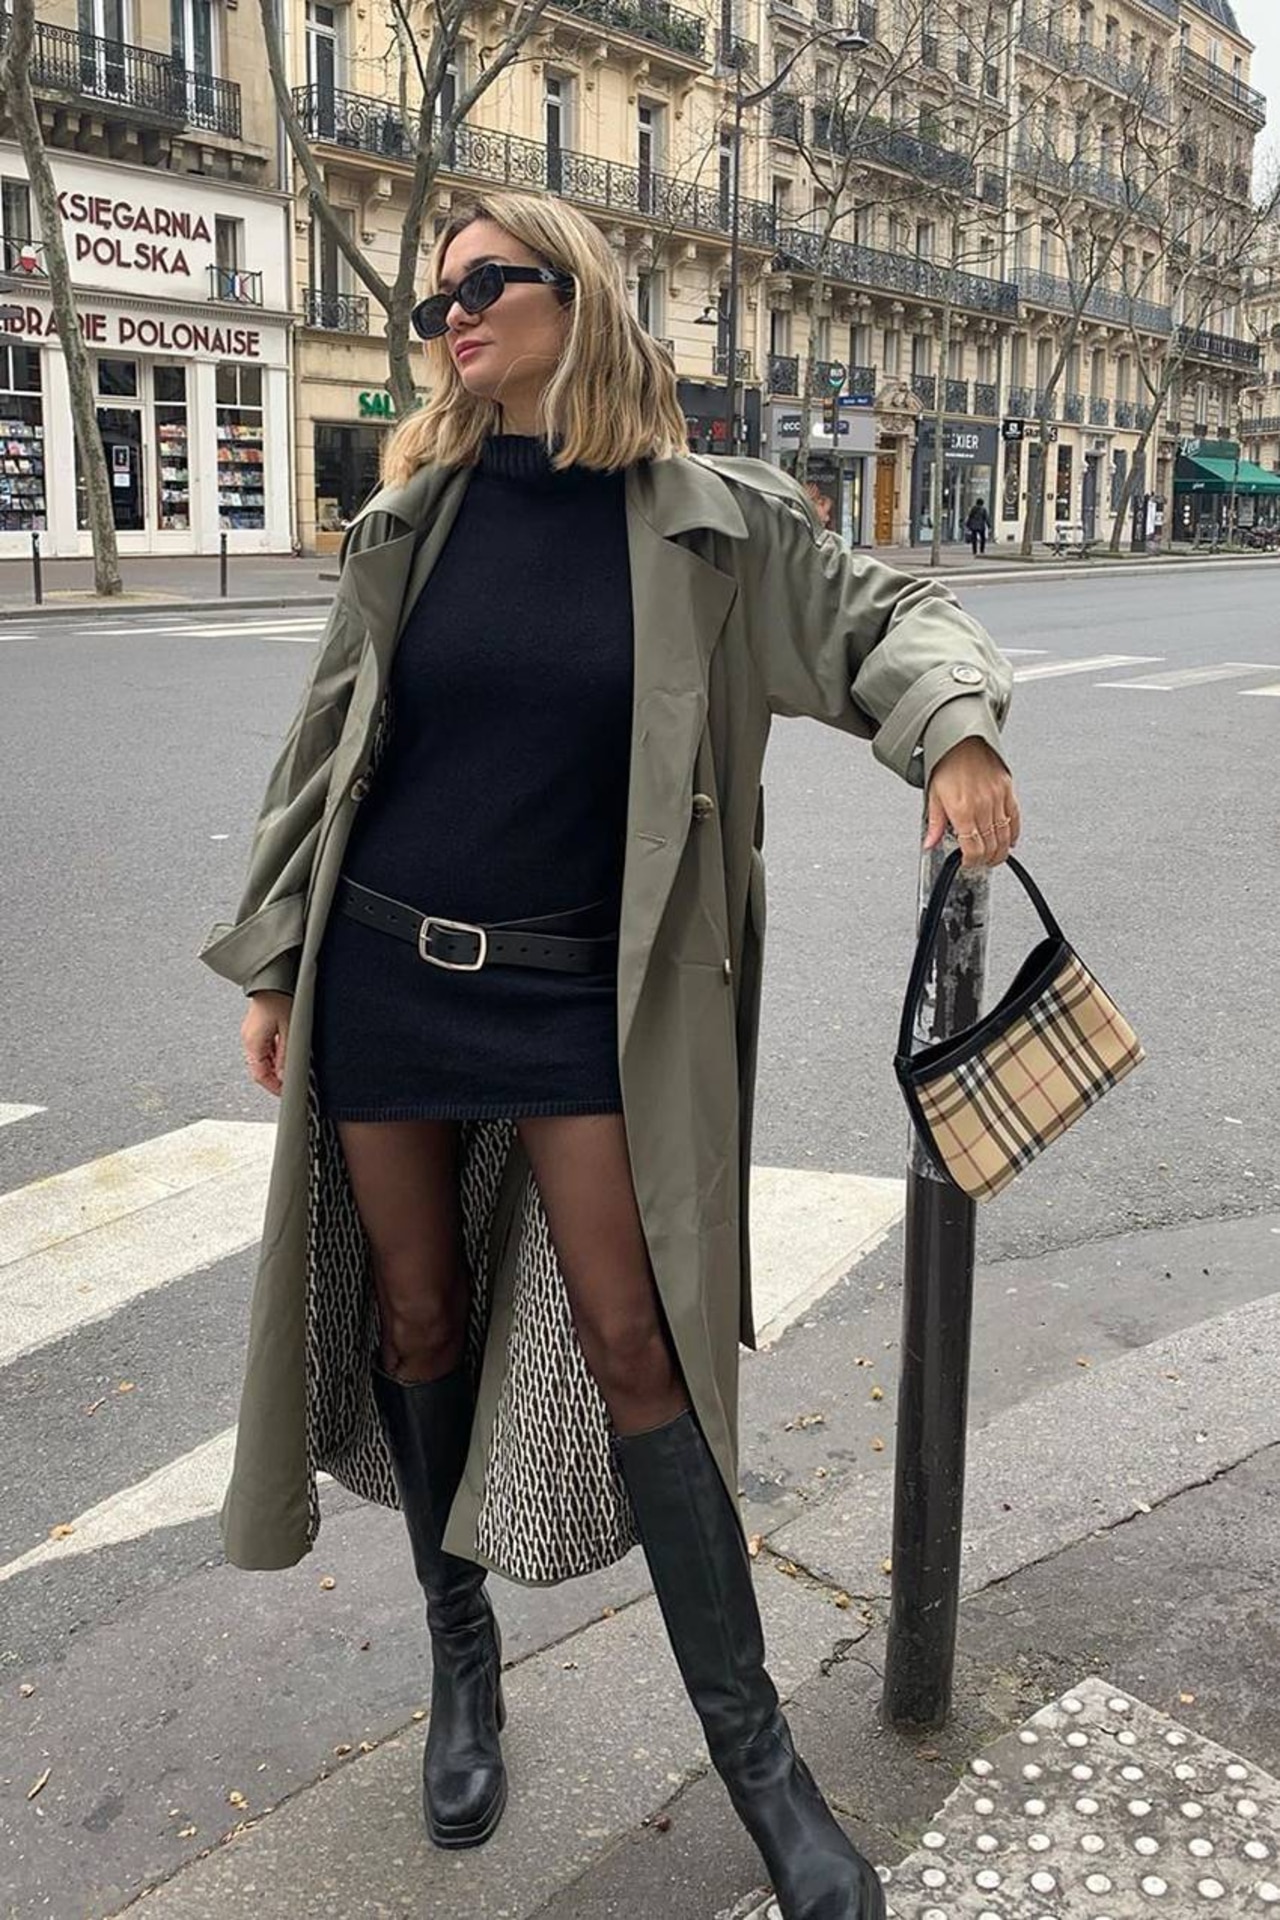 French Winter Fashion: French Girl Style Essentials For Winter